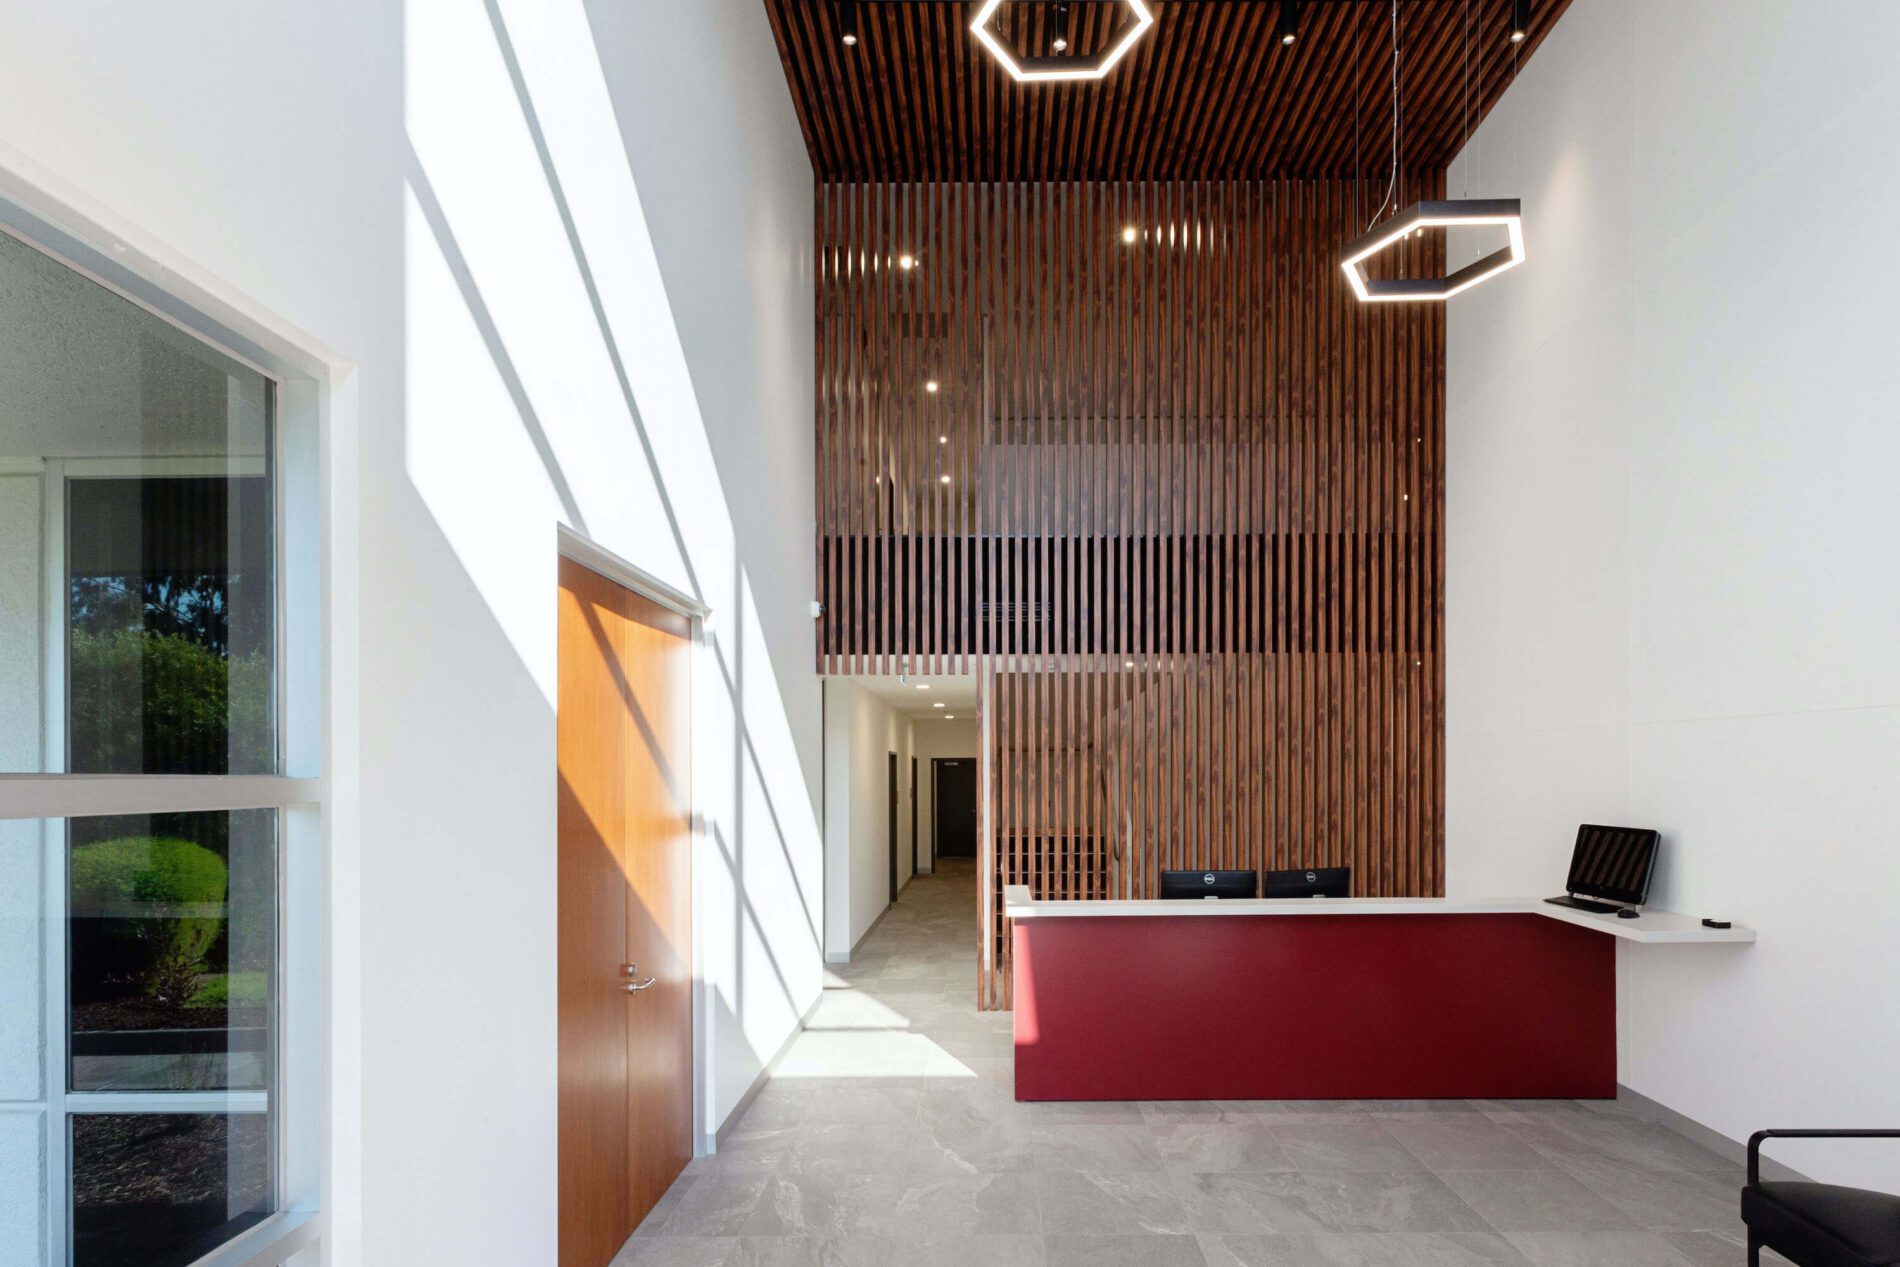 Timber lined reception with hexagonal lights overhead